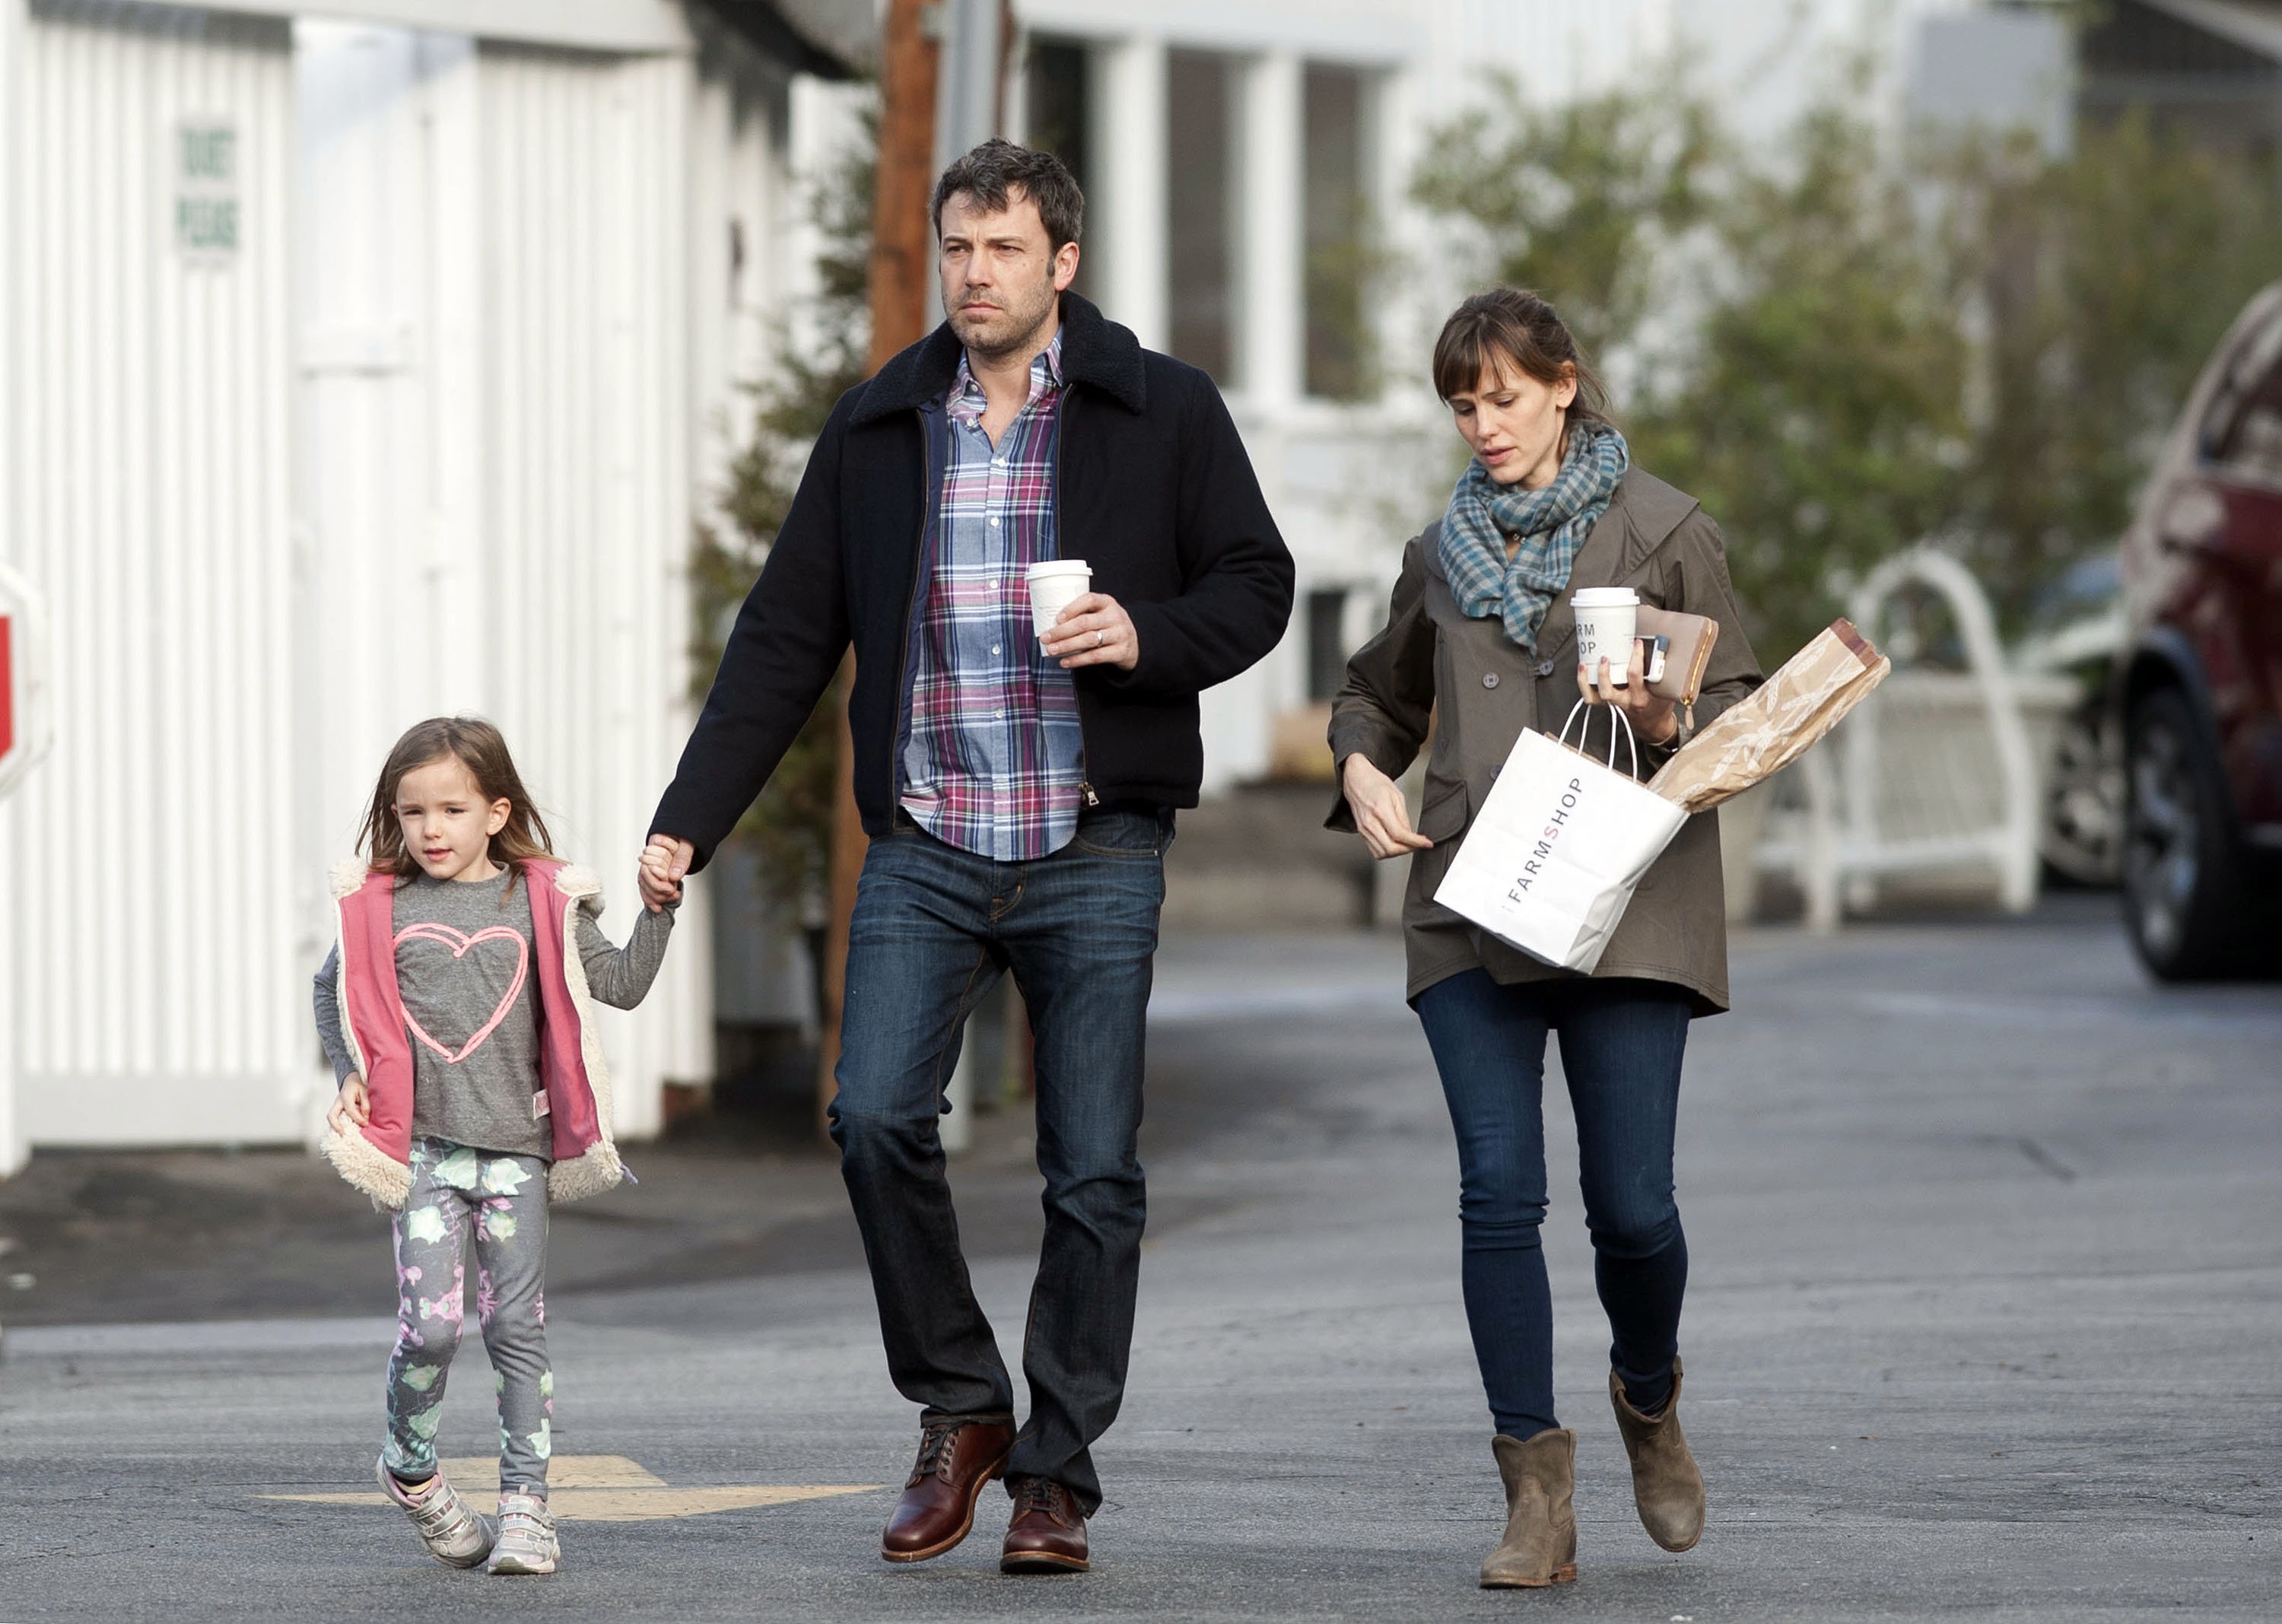 Ben Affleck and Jennifer Garner are seen with their daughter, Seraphina Affleck on February 06, 2014 in Los Angeles, California. | Source: Getty Images